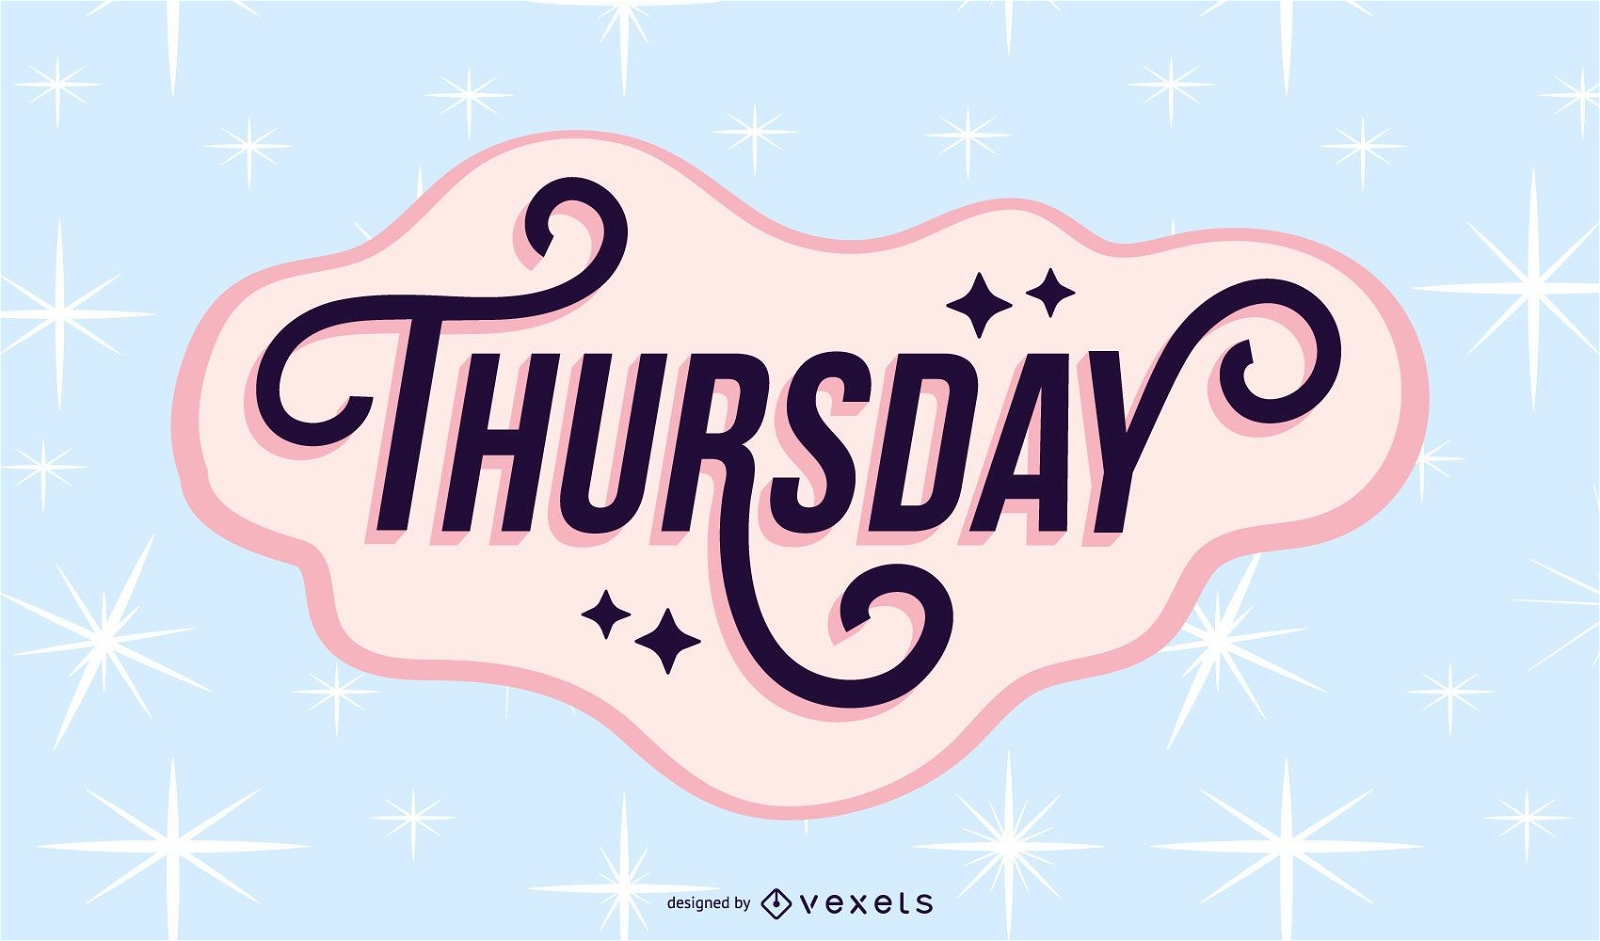 Thursday vector graphics to download in AI, SVG, JPG and PNG. 